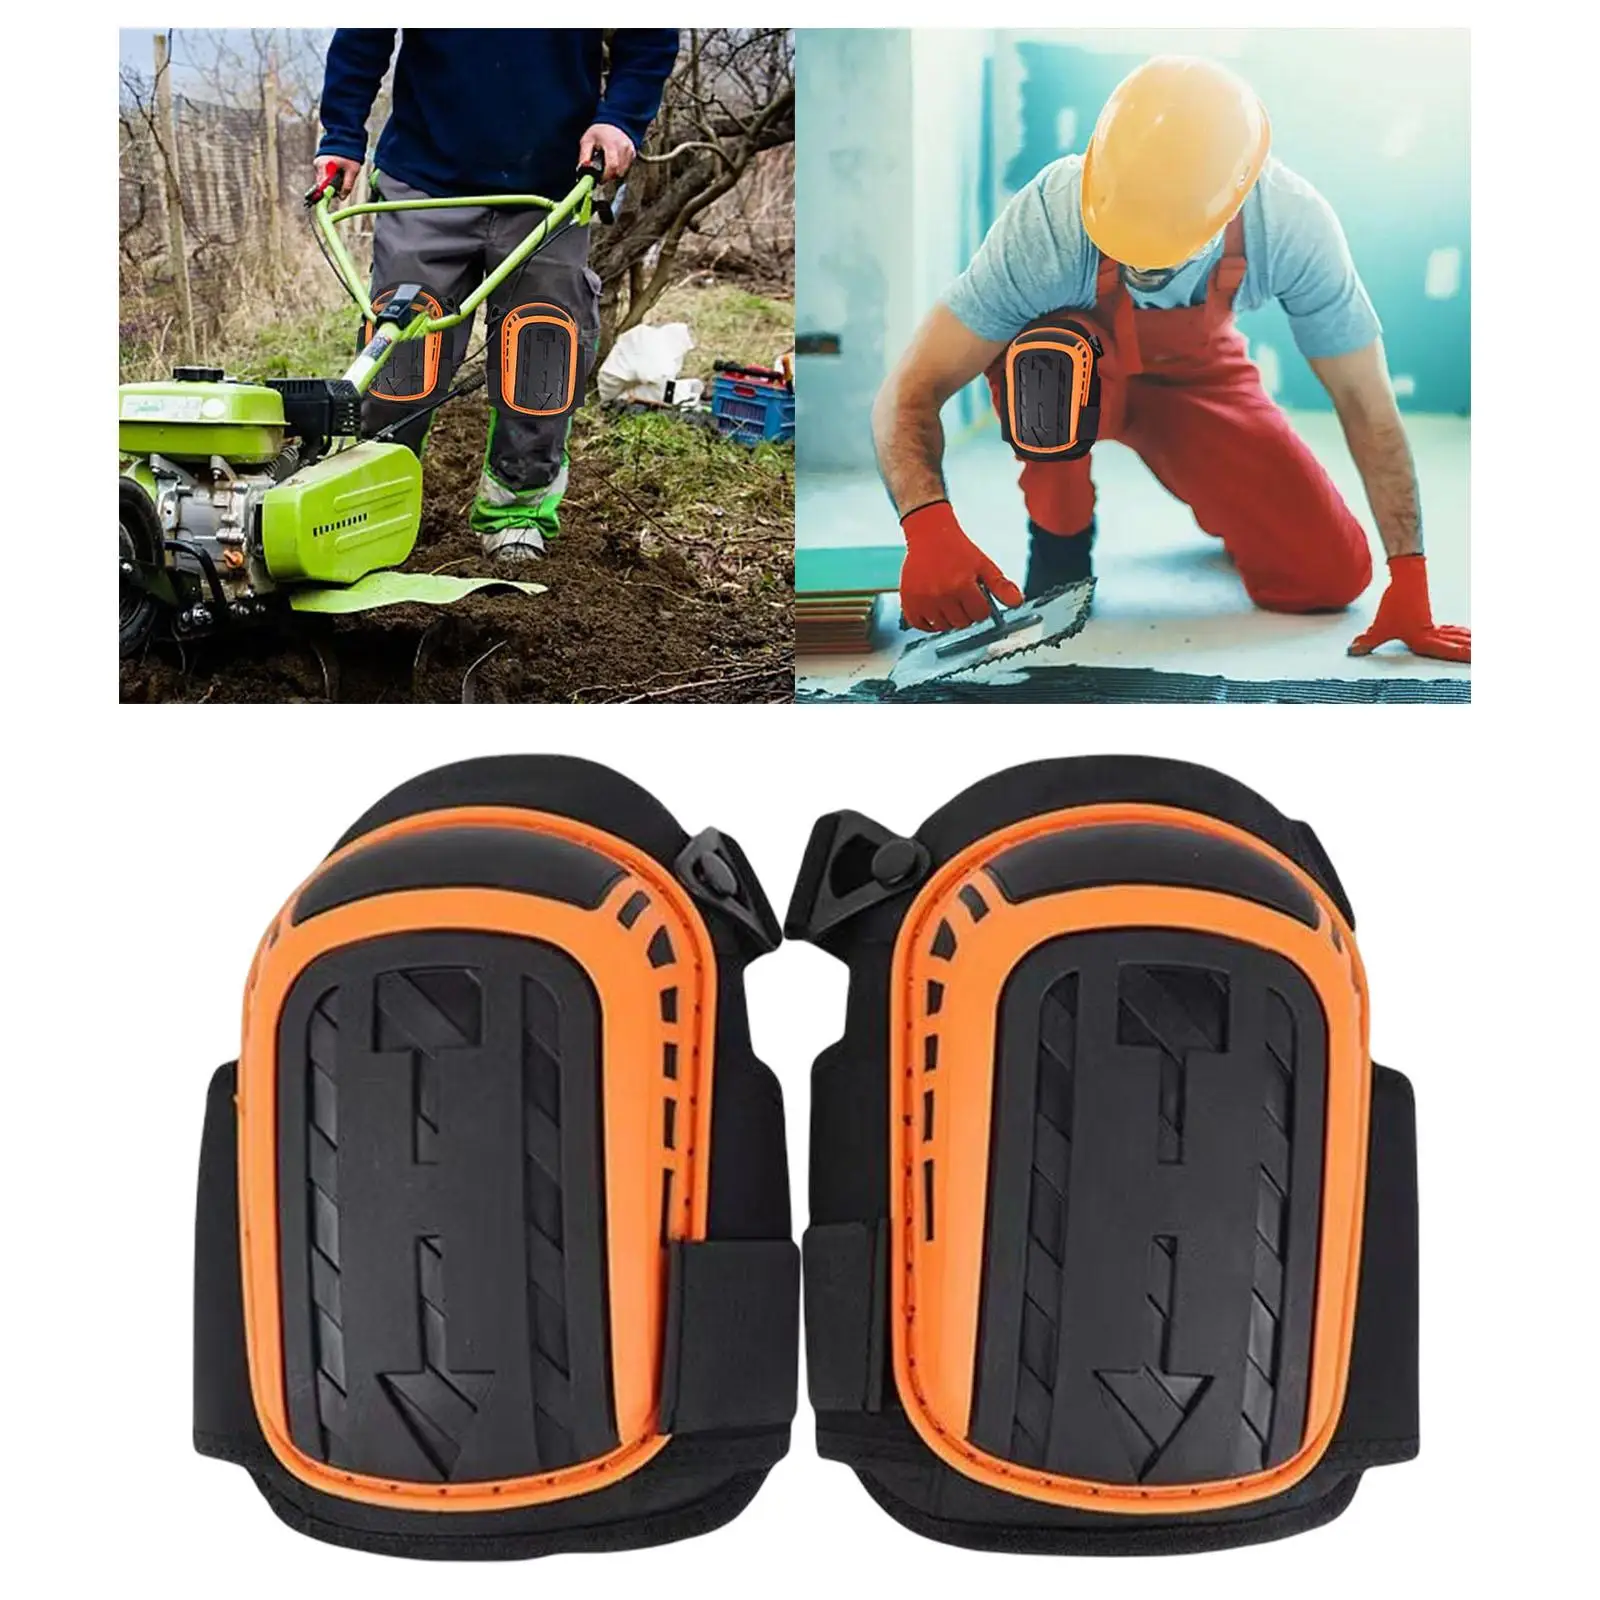 Knee Pad 1 Pair  Knee Pads Heavy Duty Comfortable Construction Tools Knee Pads for  Skating Garden Cycling